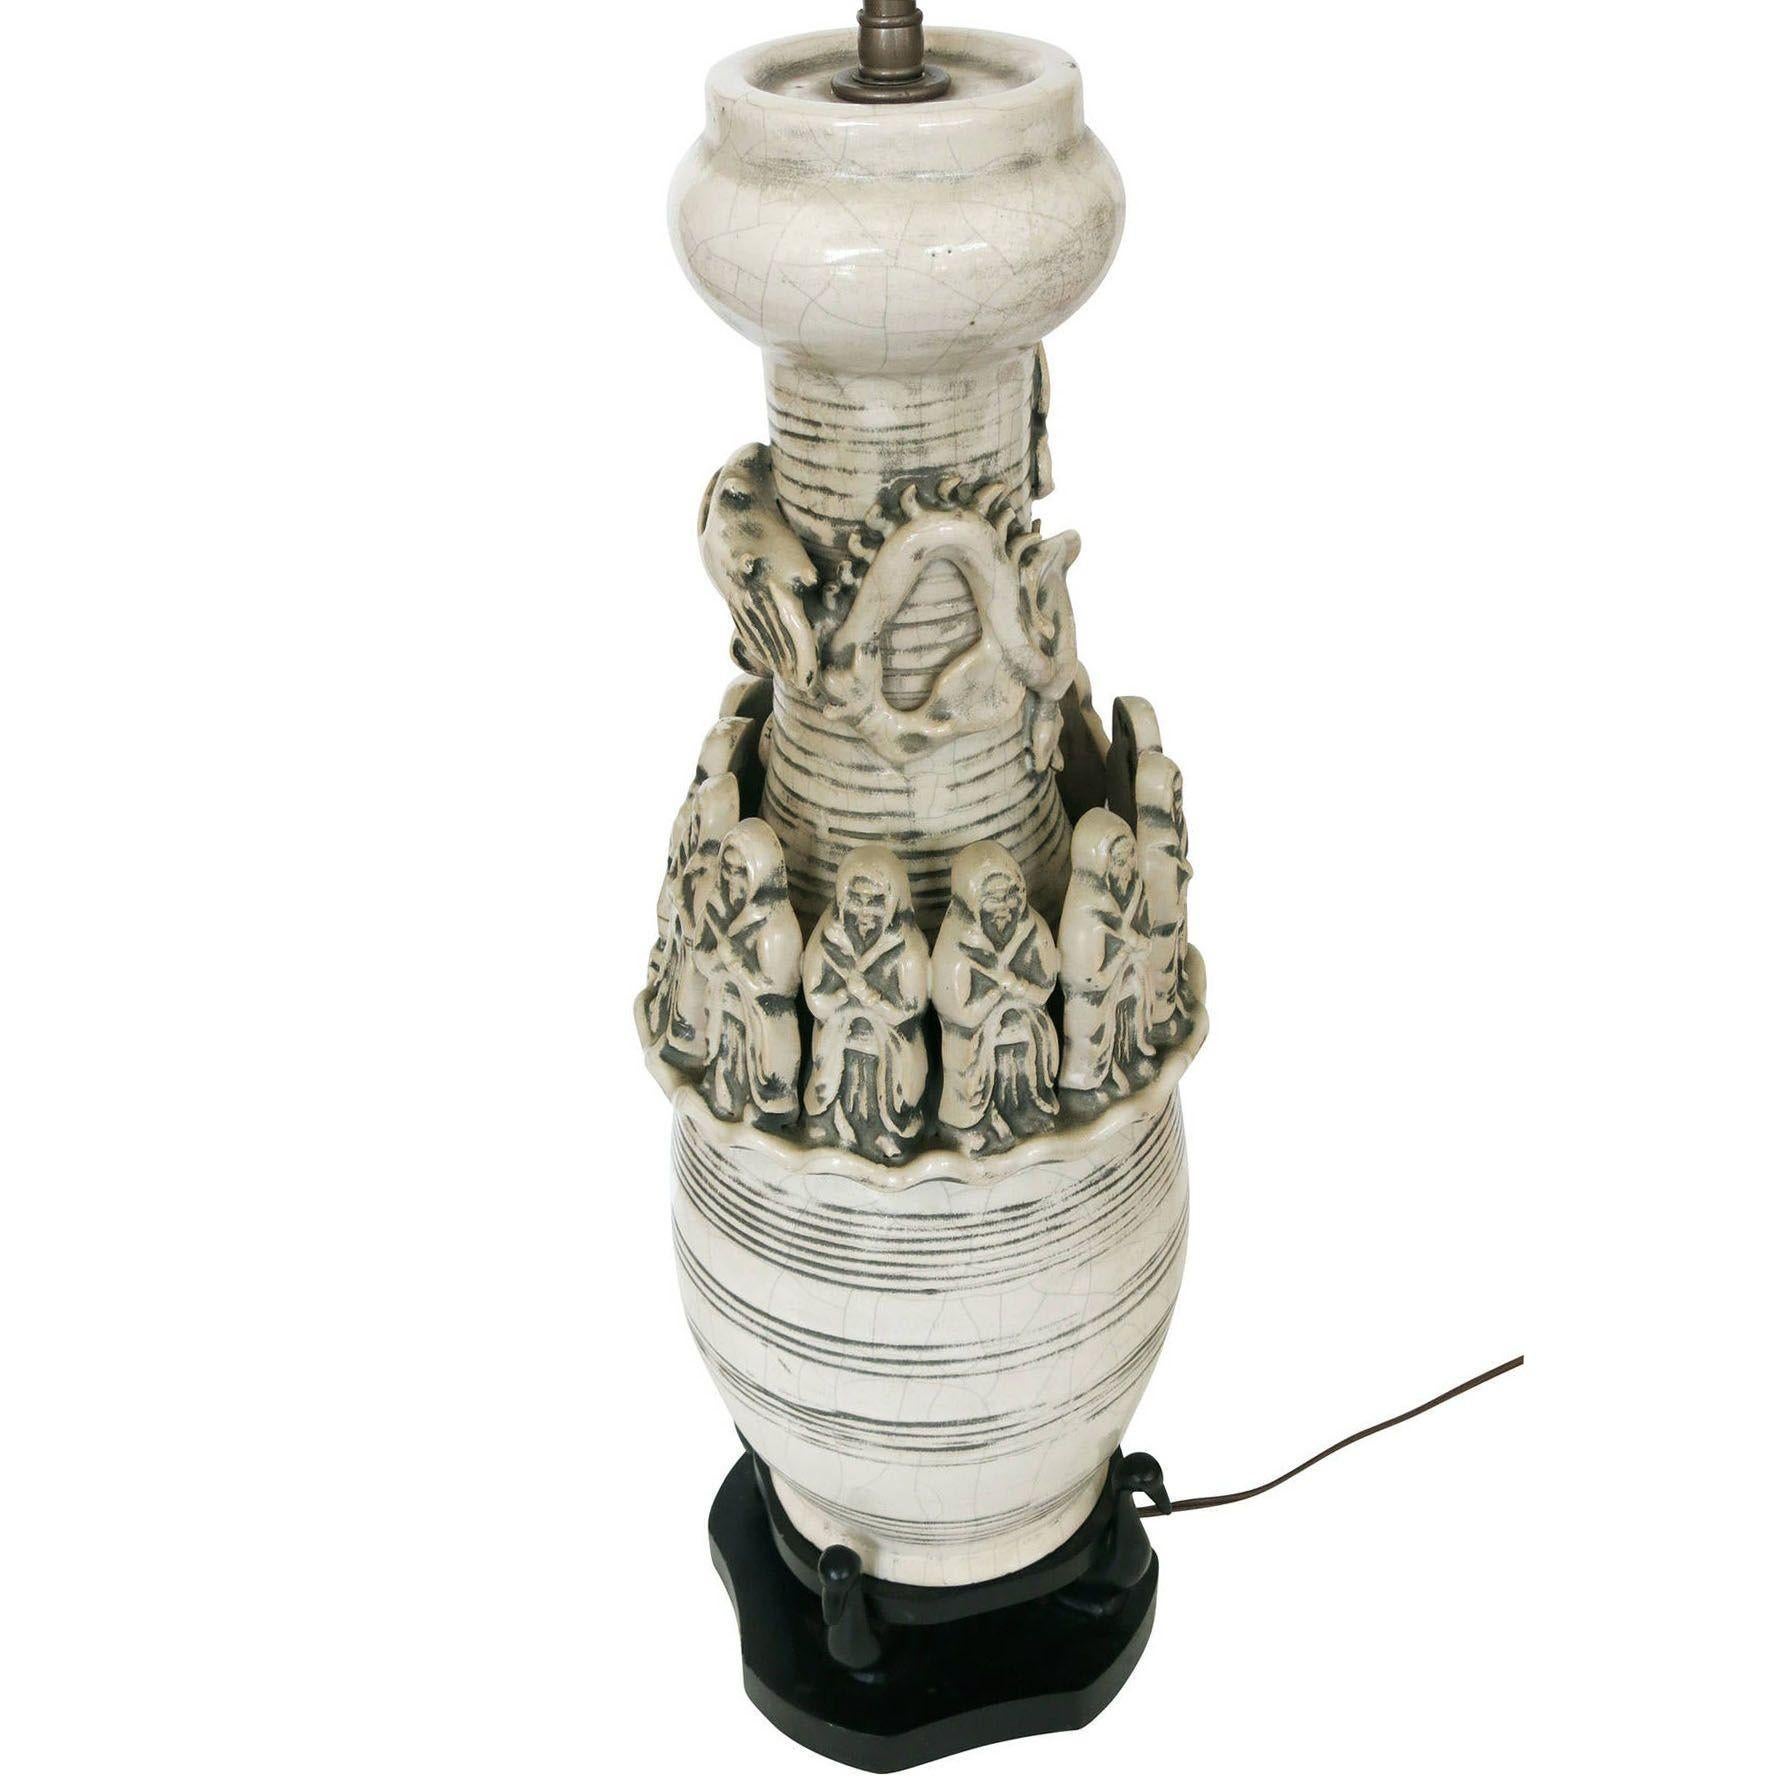 The work is a white art pottery lamp of a cylindrical shape with wood base. The lamp is decorated with 12 monks that surround a dragon. The lamp also has decorative, horizontal patterns and crackle finish. Carved out of the wood base that holds the